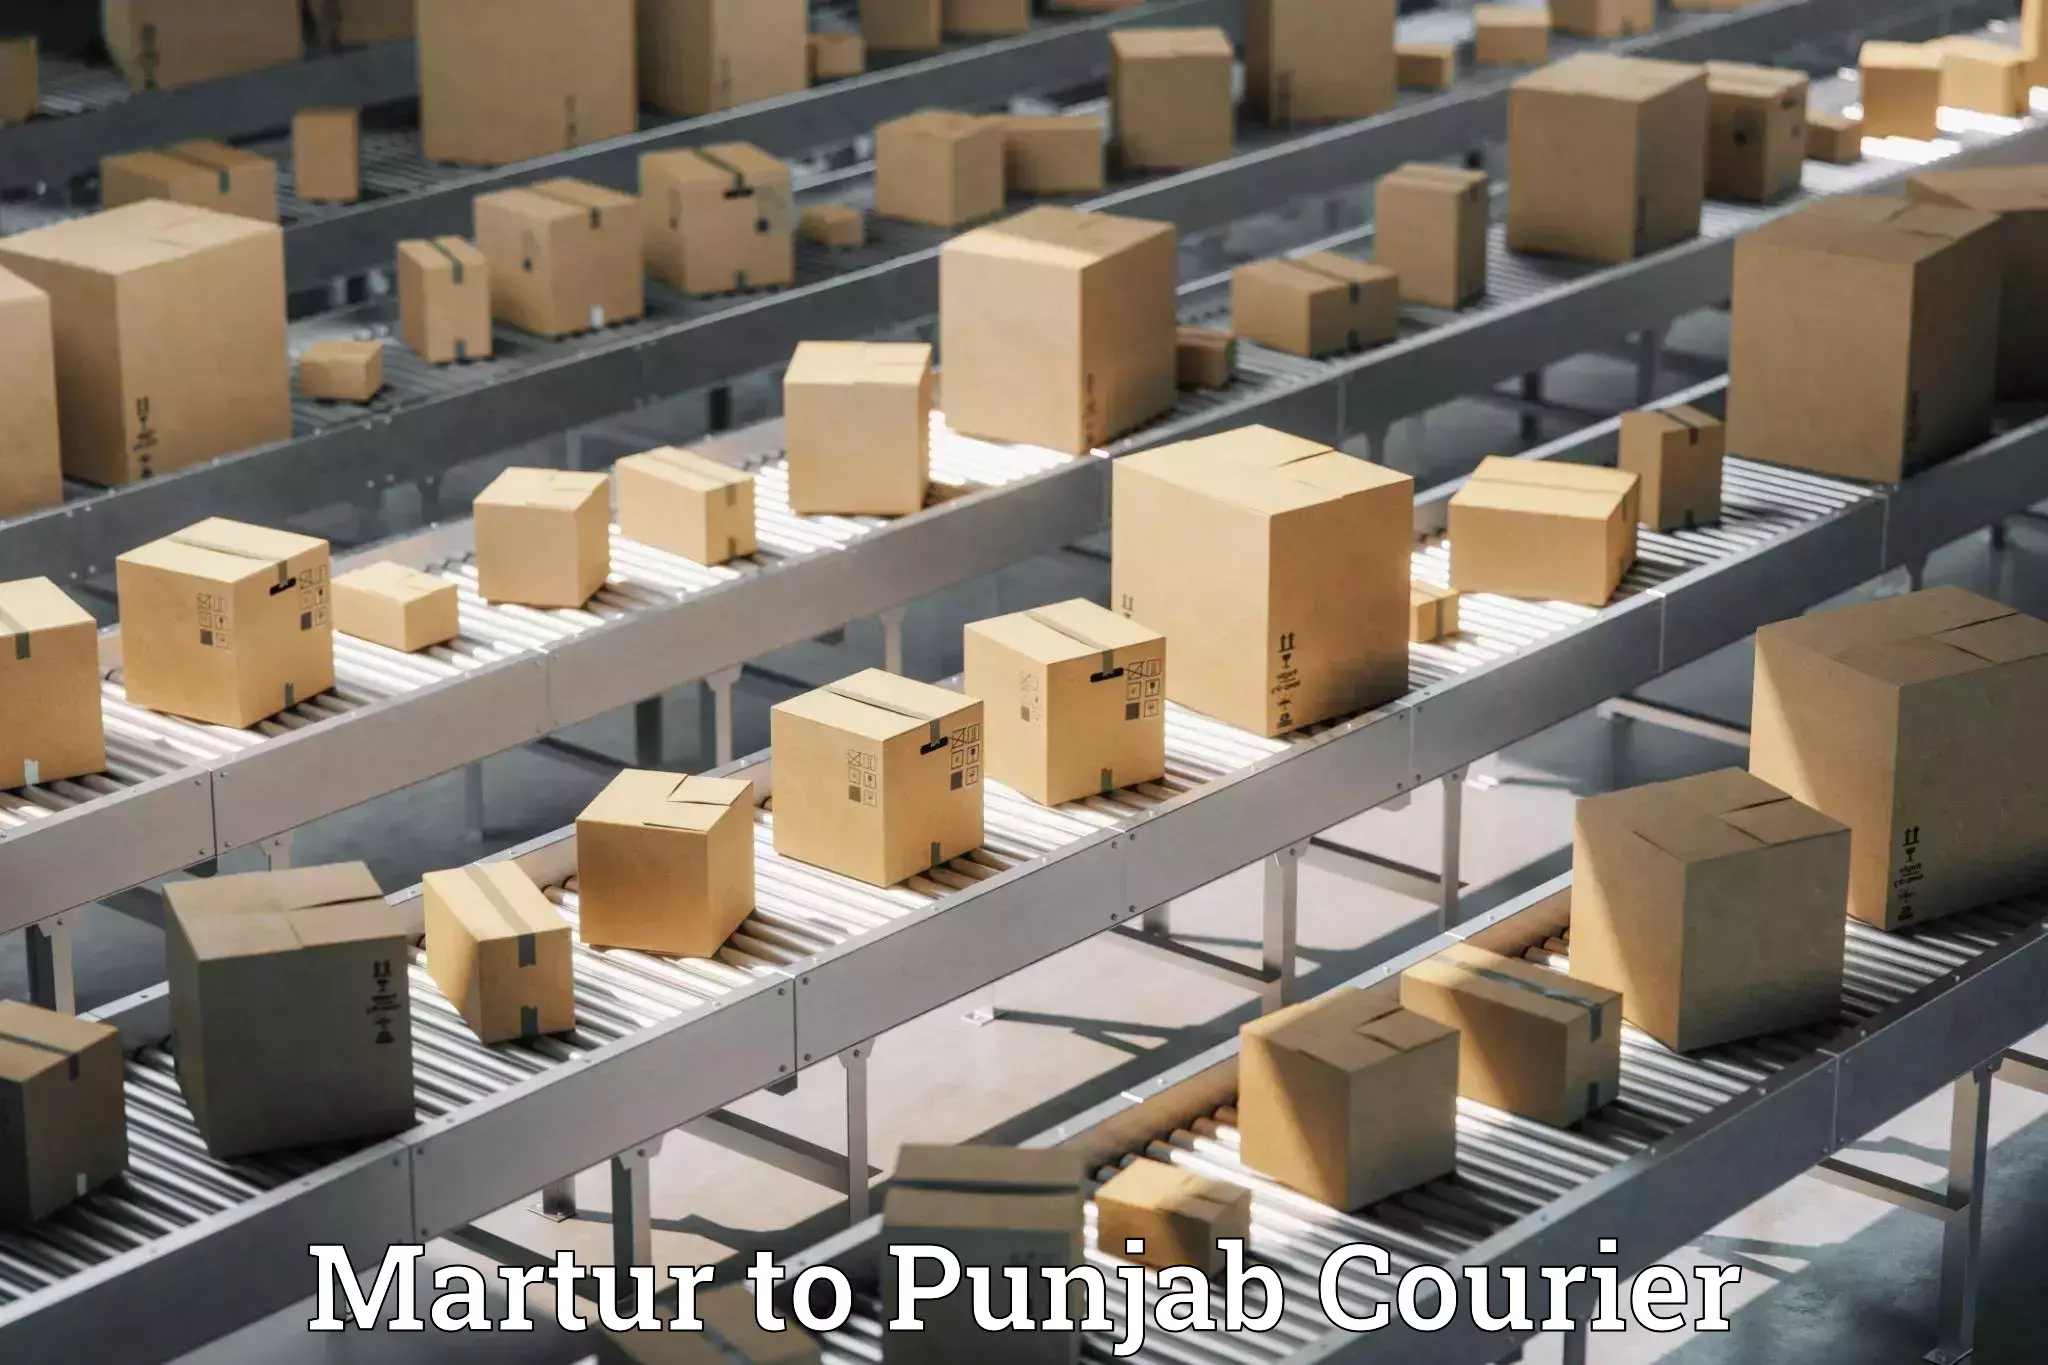 Next day courier Martur to Punjab Agricultural University Ludhiana